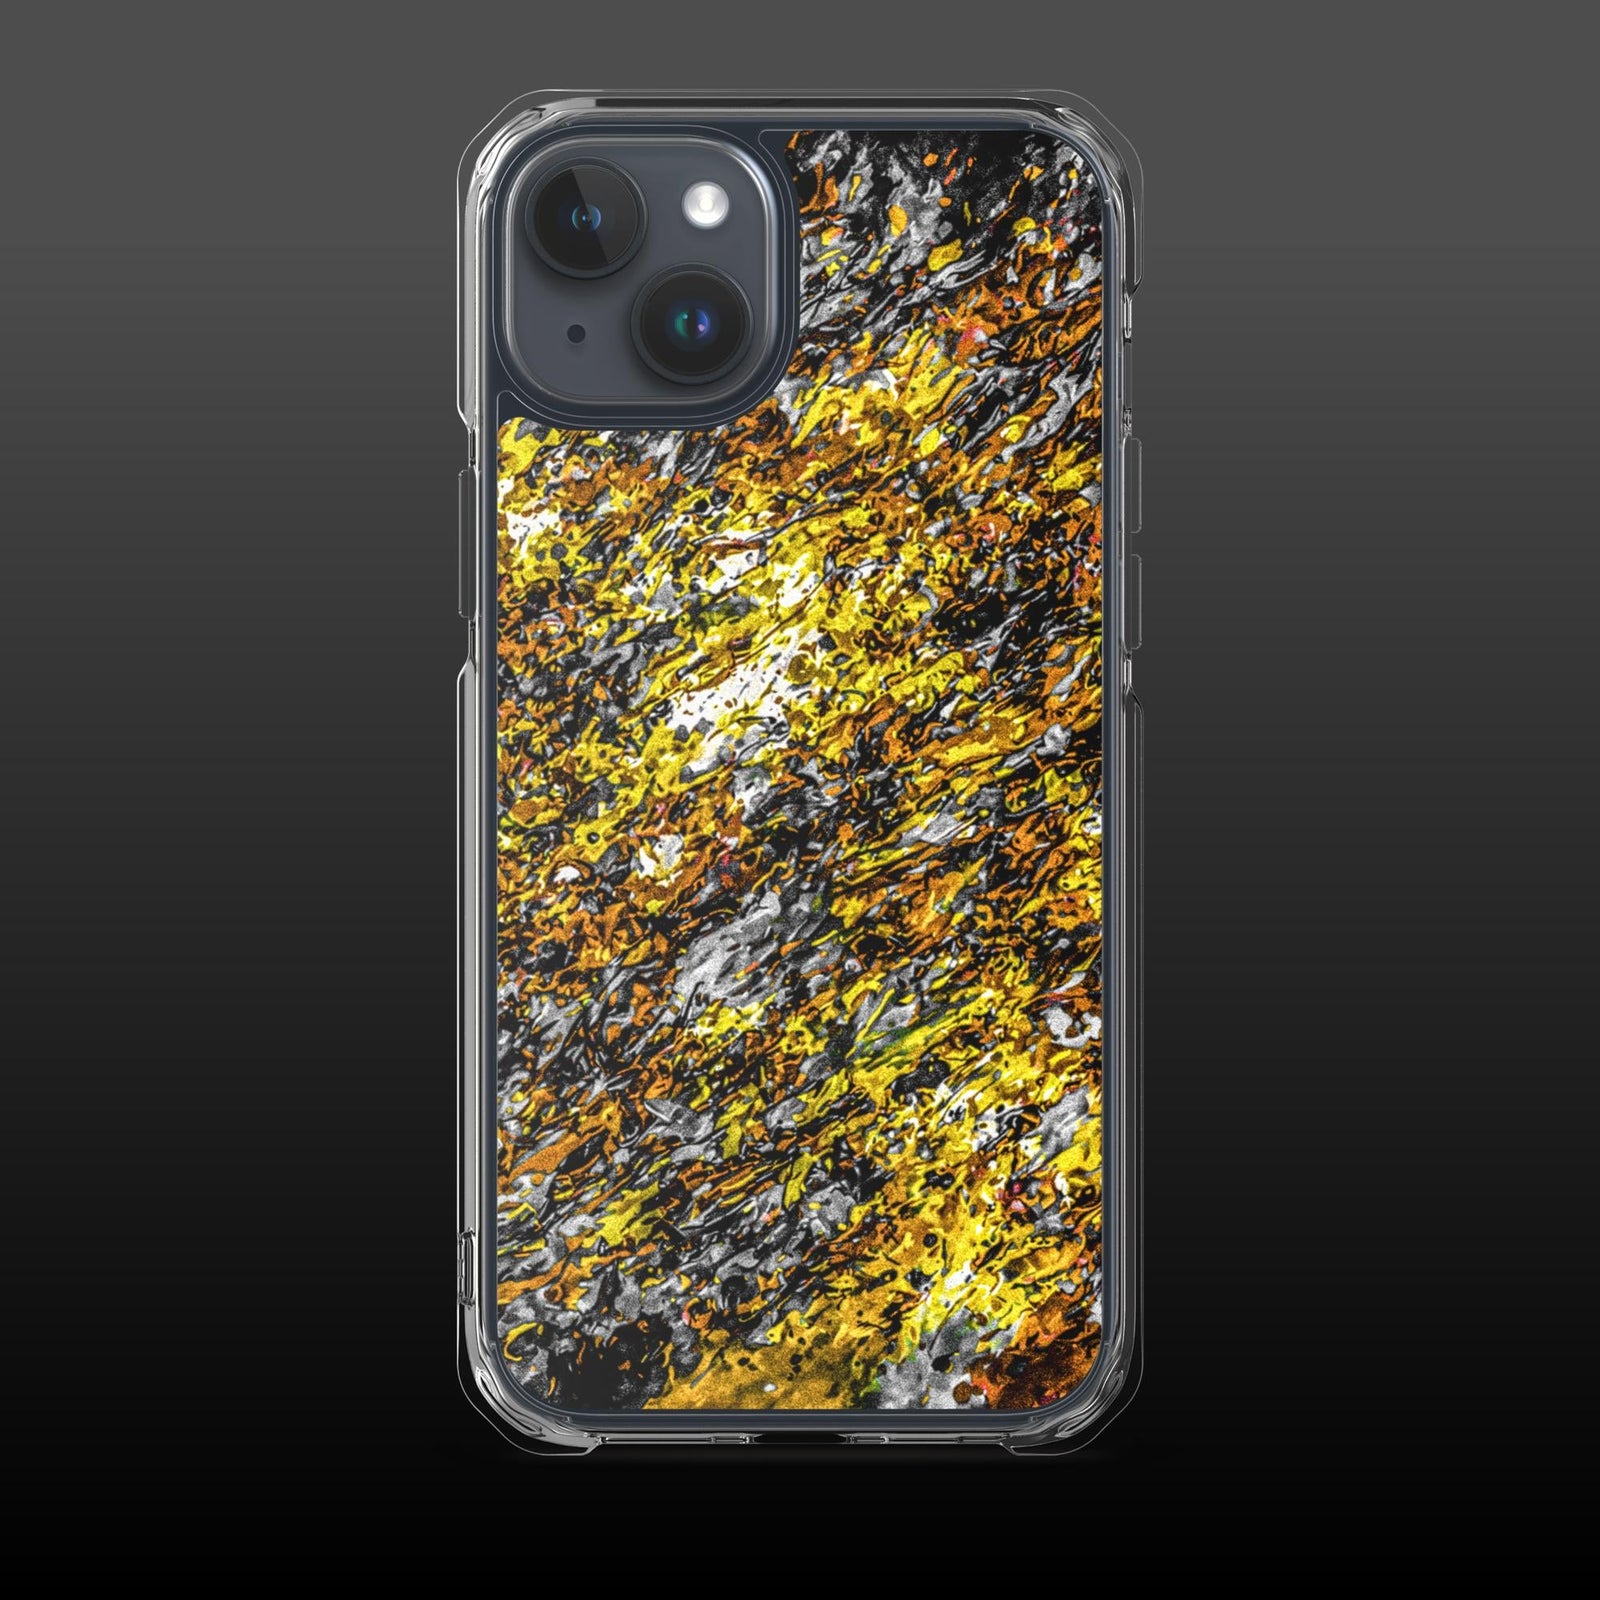 "Fuming chaos" clear iphone case - Clear iphone case - Ever colorful